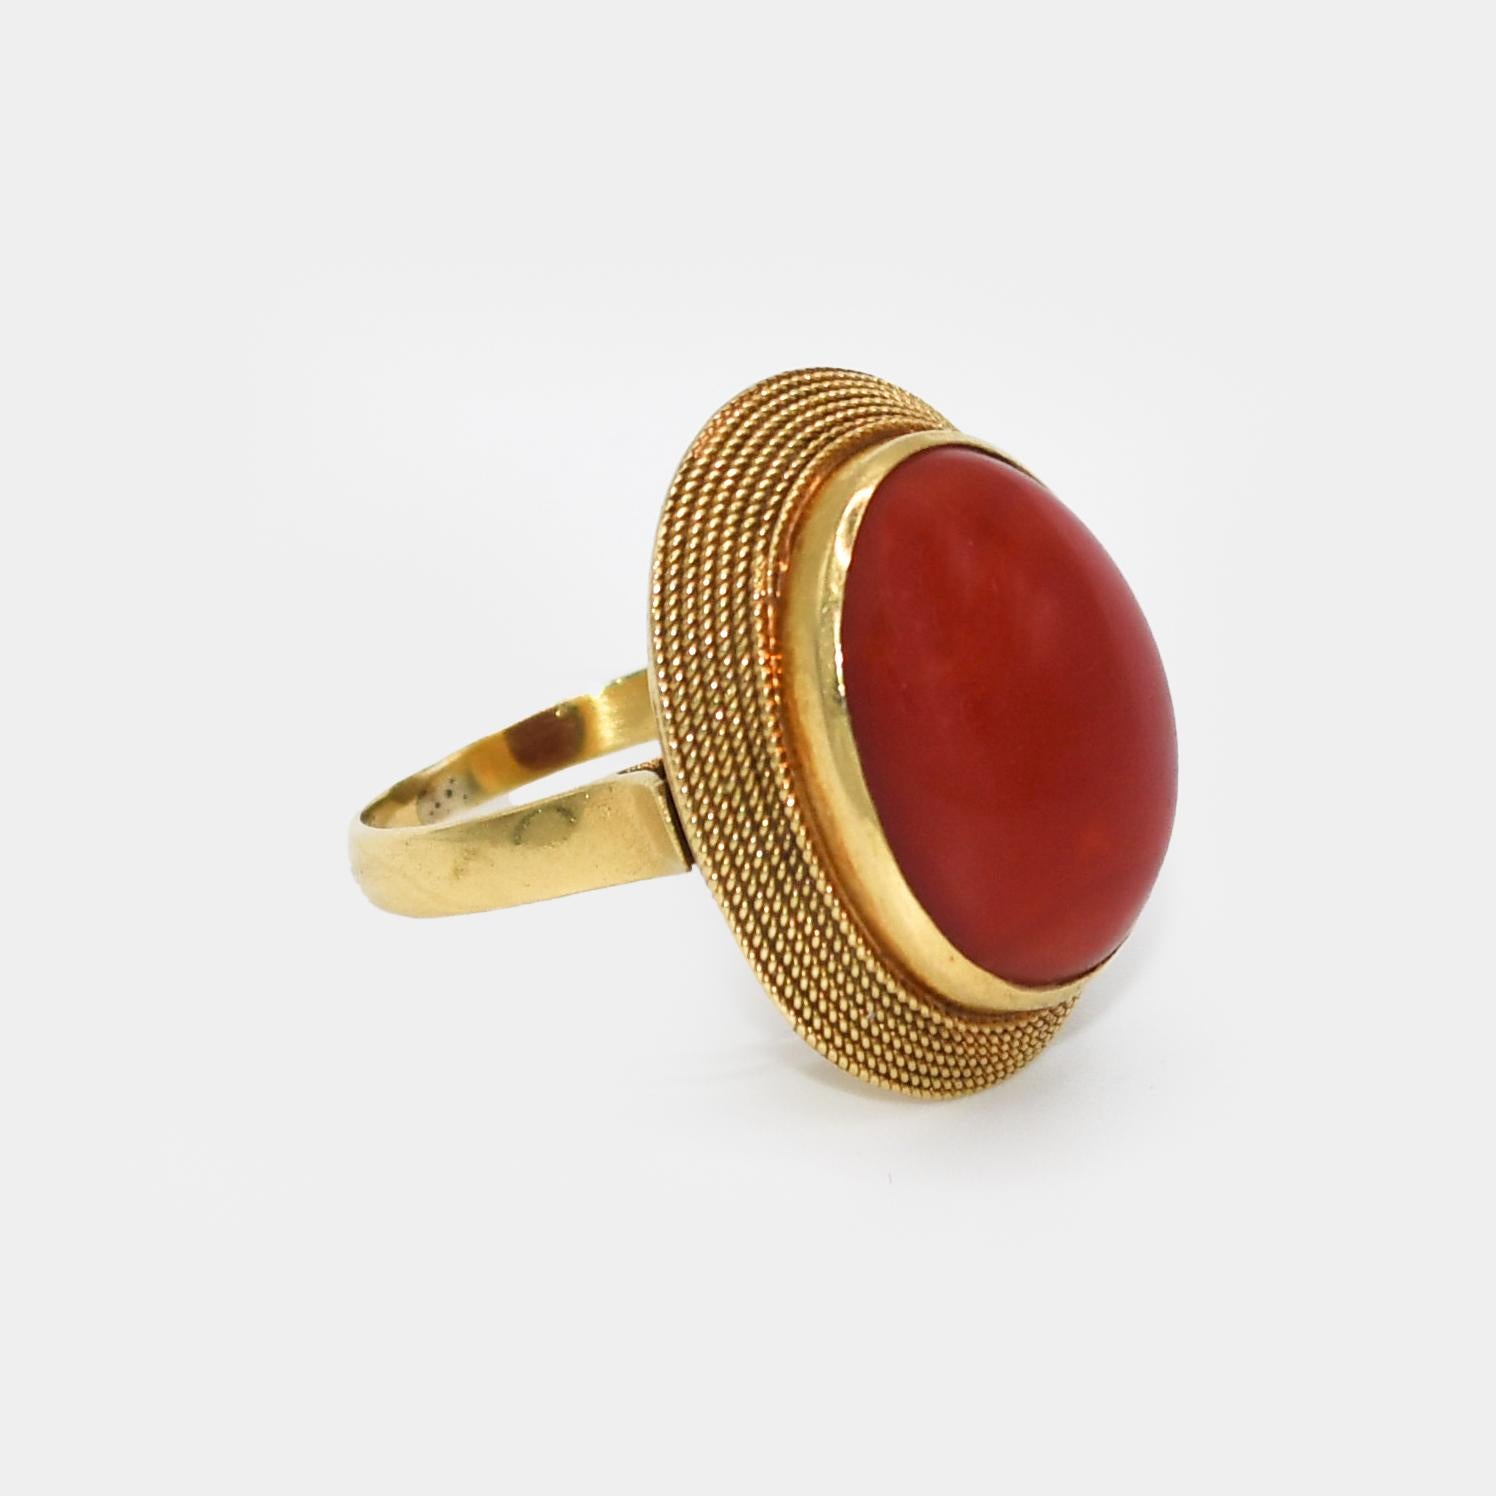 18K Yellow Gold Red Coral Ring 6.9g
Ladies vintage 18k yellow gold and red coral ring.
Stamped 18k Italy and weighs 6.9 grams gross weight.
The red coral measures 16mm long by 11.8mm wide.
The top of the ring measures 7/8 by 5/8 inches.
Ring size is